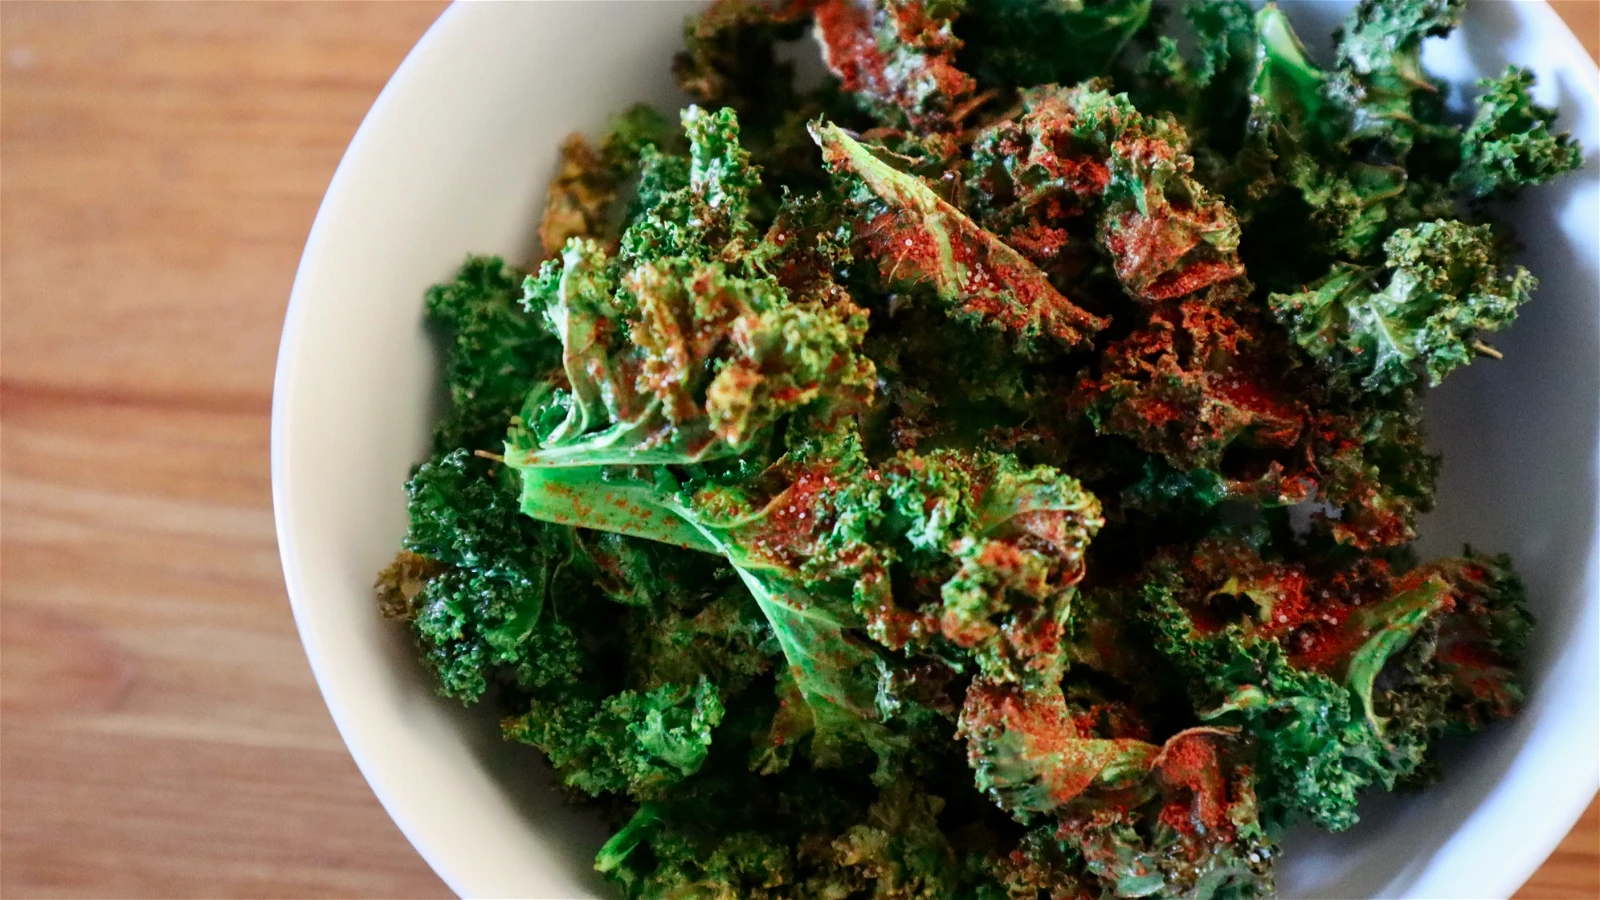 Image of Kale Chips with Sea Salt and Smoked Paprika